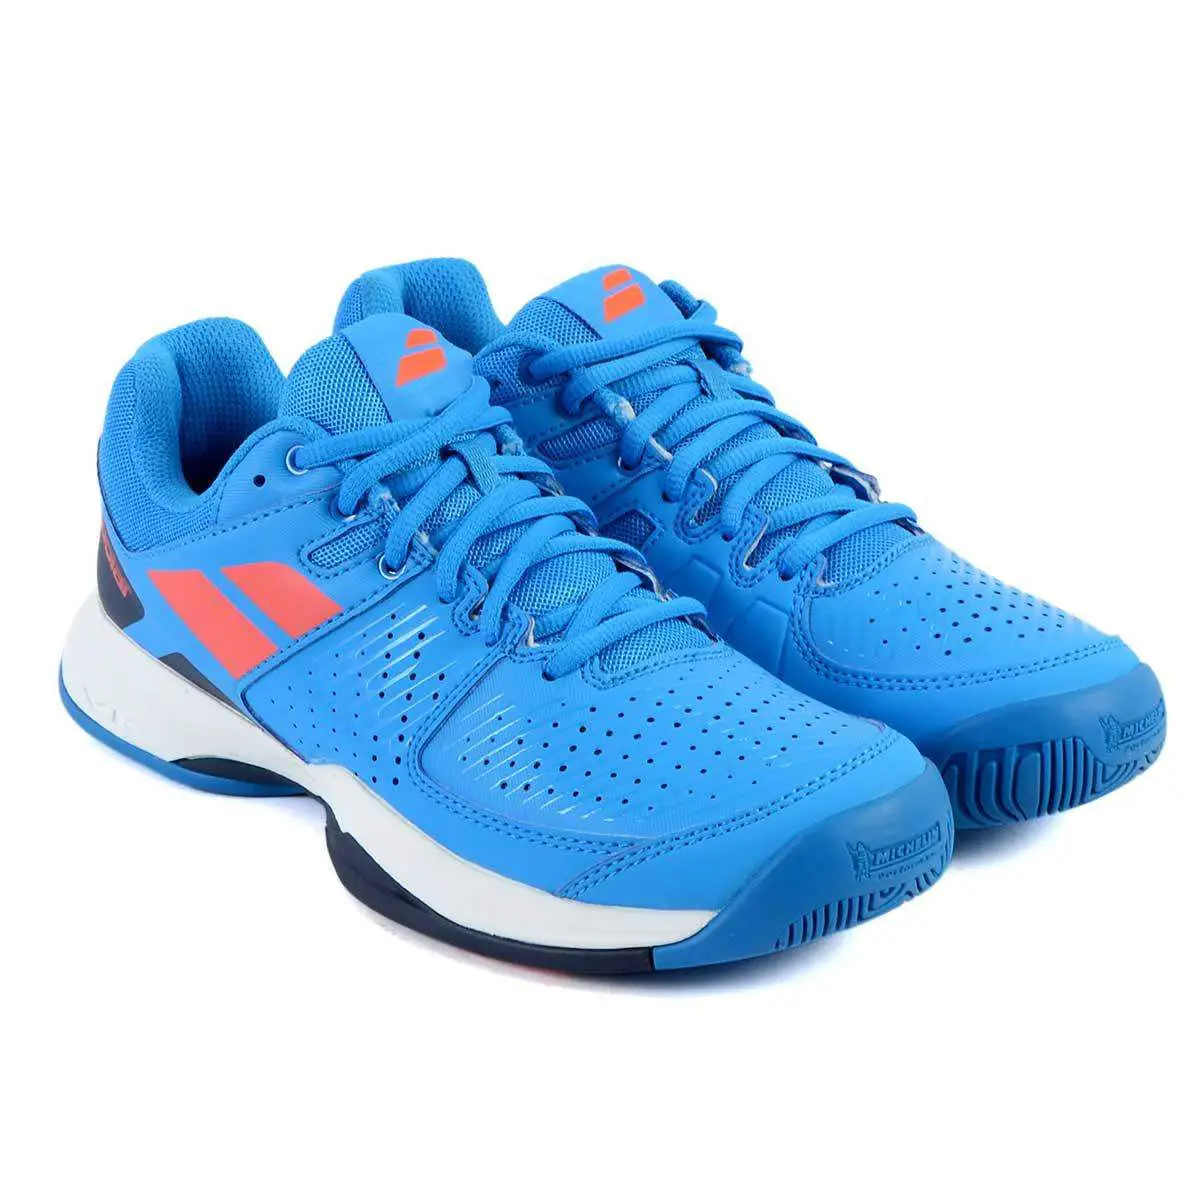 Buy Babolat Pulsion All Court Tennis Shoes (Drive Blue) Online